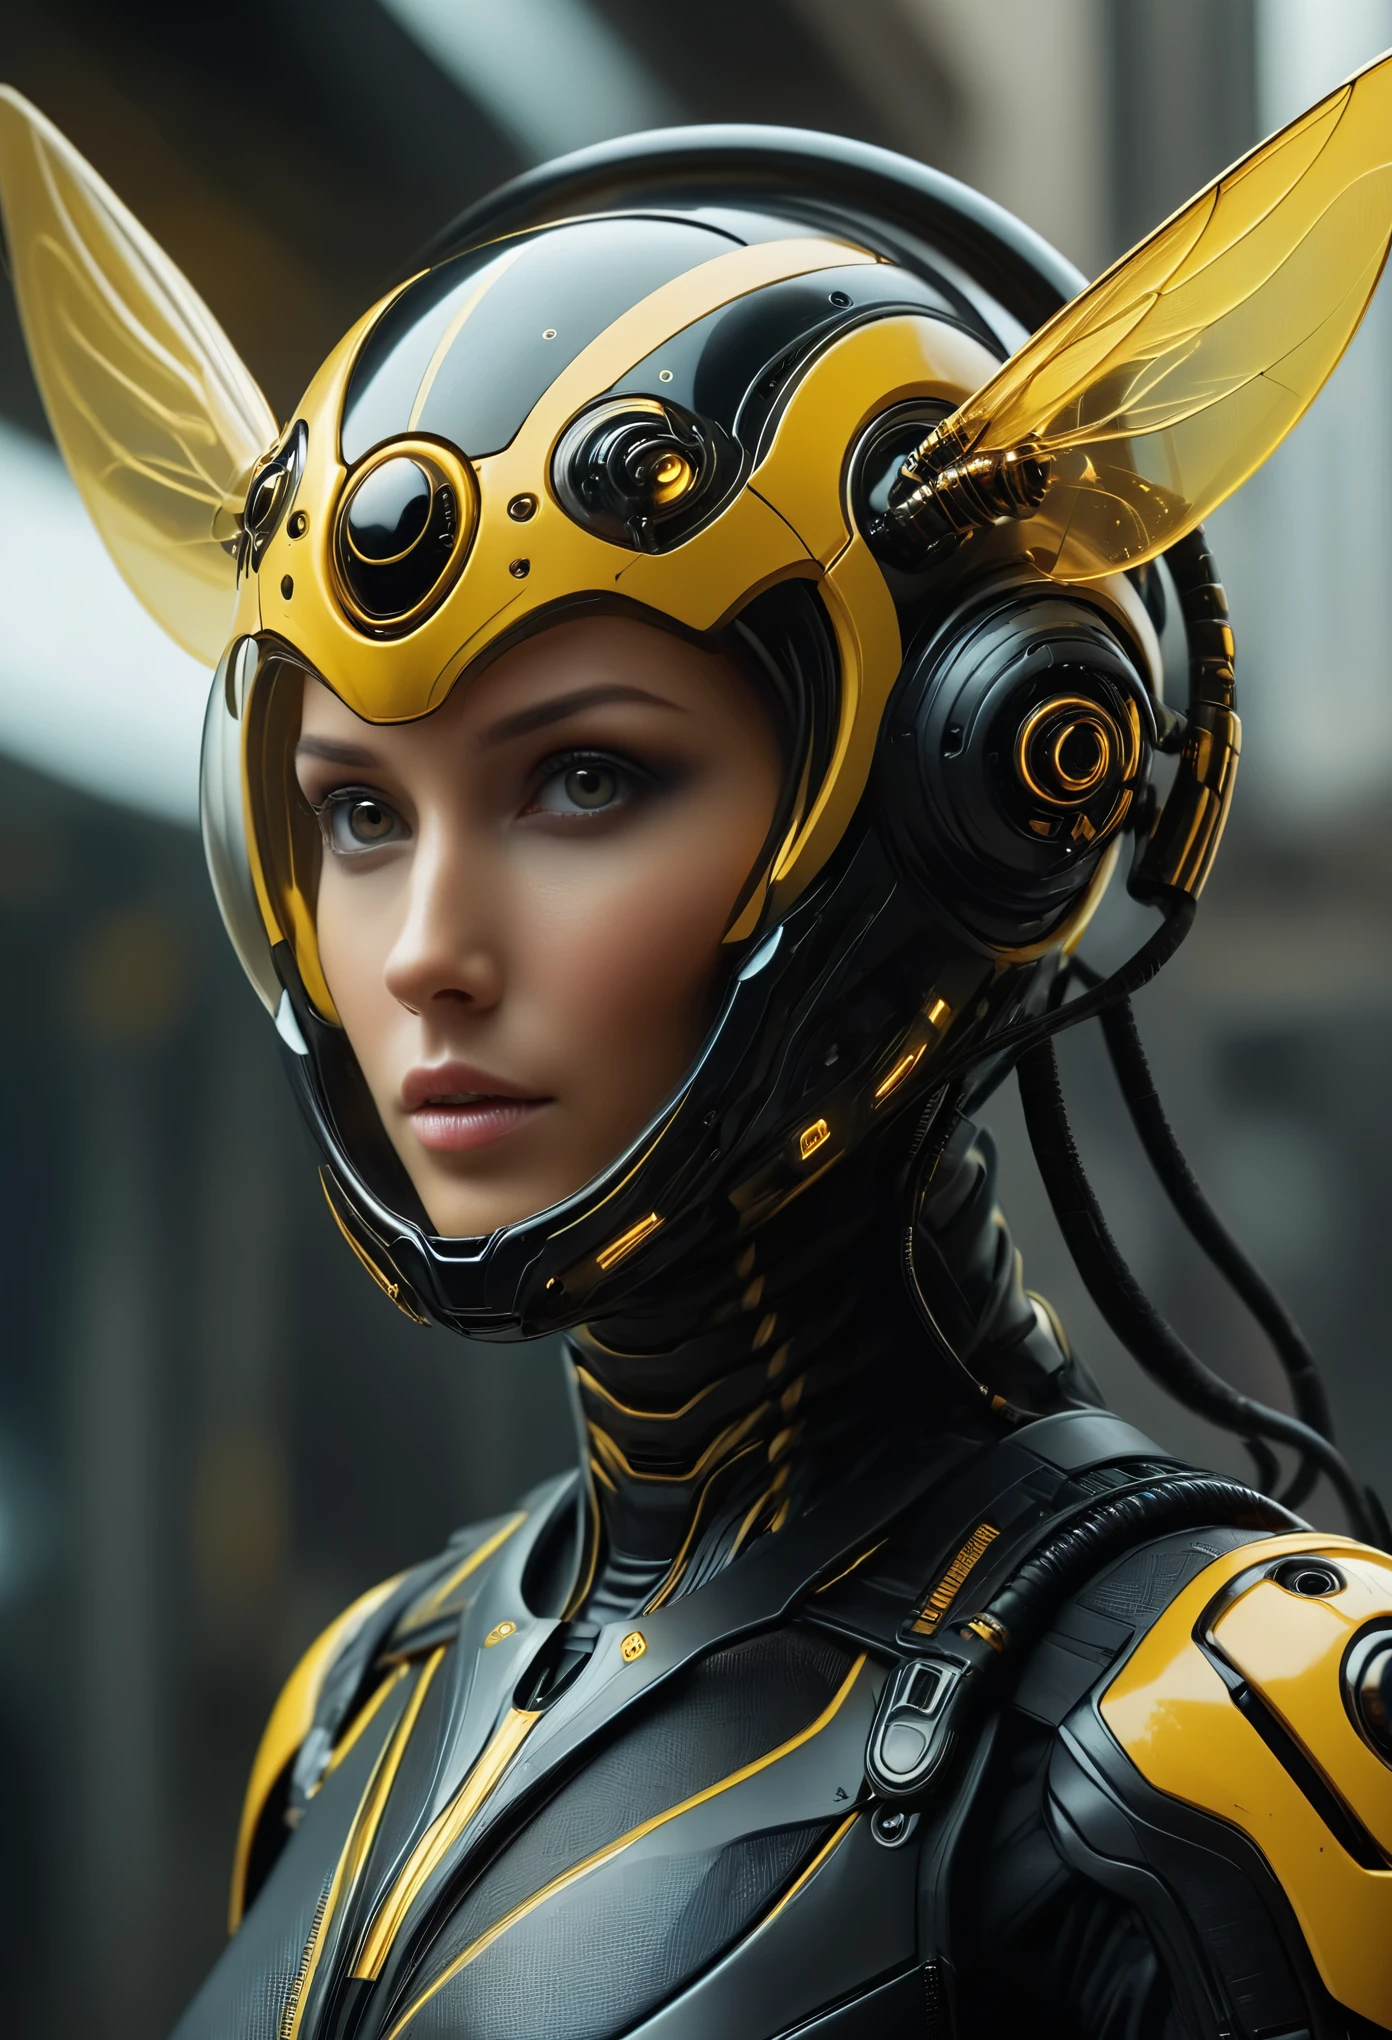 (Best Quality, 4K, 8K, High Definition, Masterpiece:1.2), (Ultra Detailed, Realistic, Photorealistic:1.37),A terrifying female combat android combined with a human female and a hornet, A full-face helmet shaped like a wasp's face, featuring yellow and black color scheme like a hornet, enormous compound eyes, and futuristic technology. (NDFW:1.3)A full-face helmet modeled after the ferocious face of a wasp.